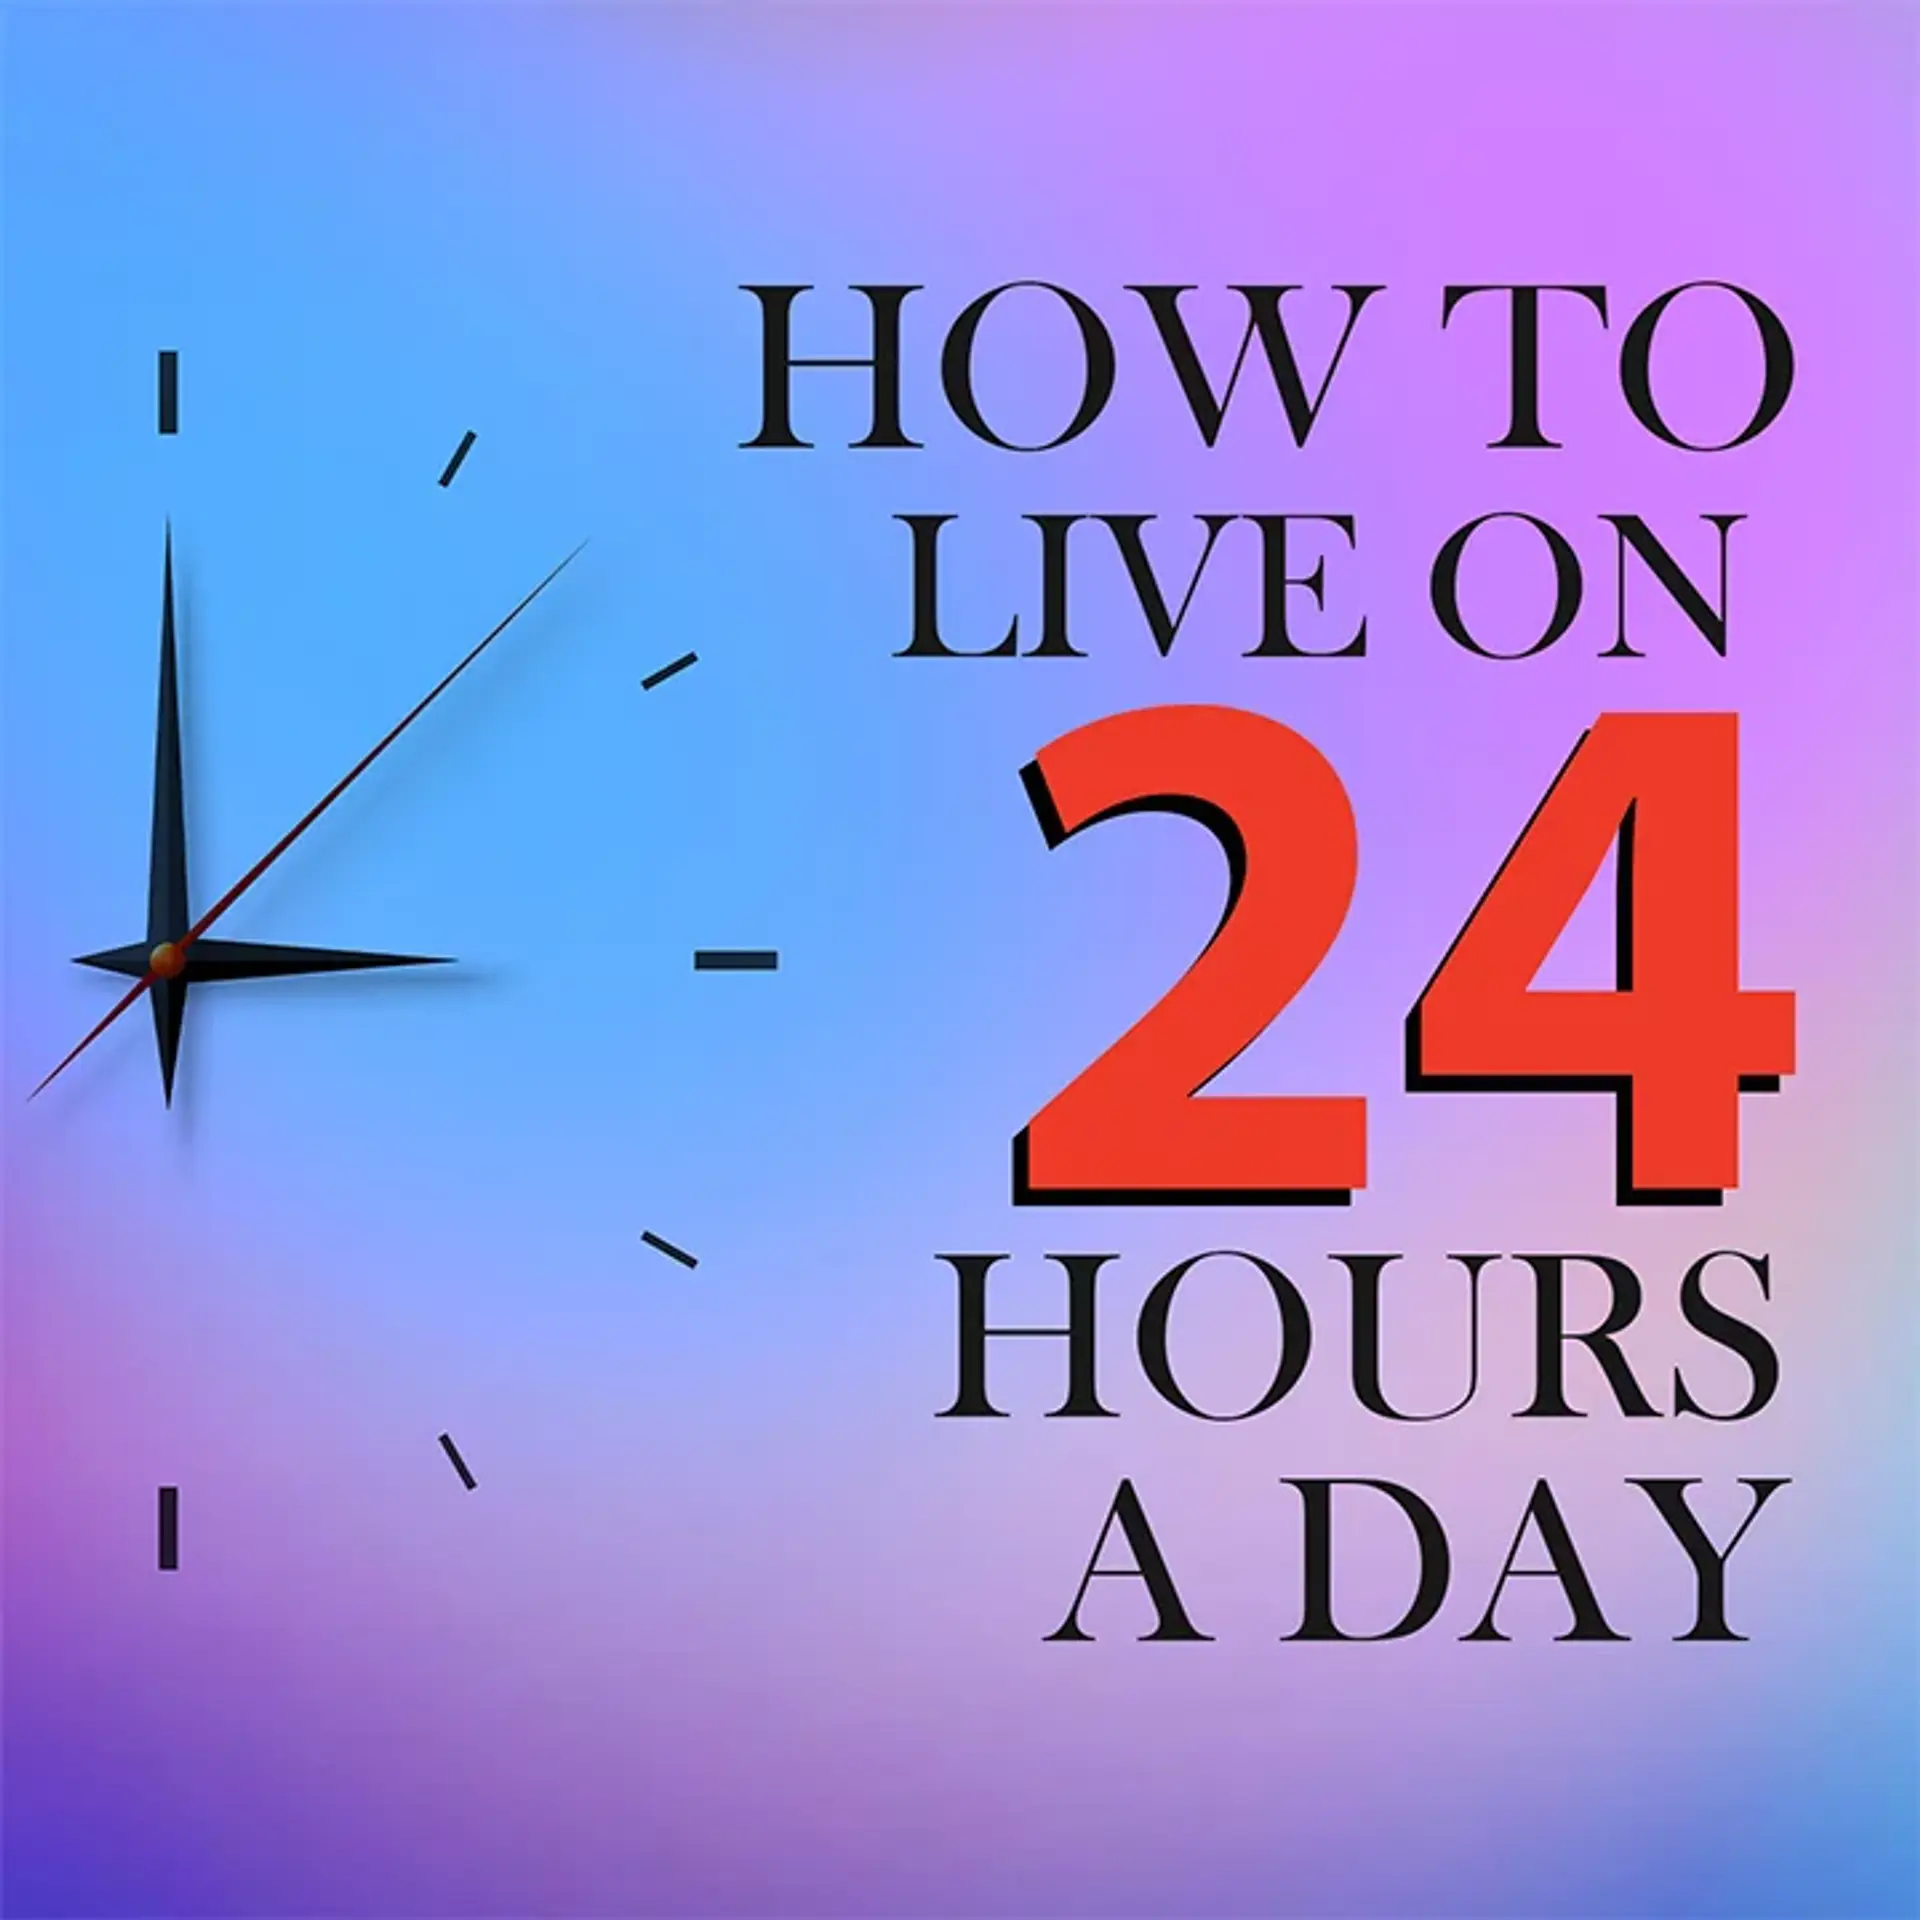 How to live on 24 hours a day | 